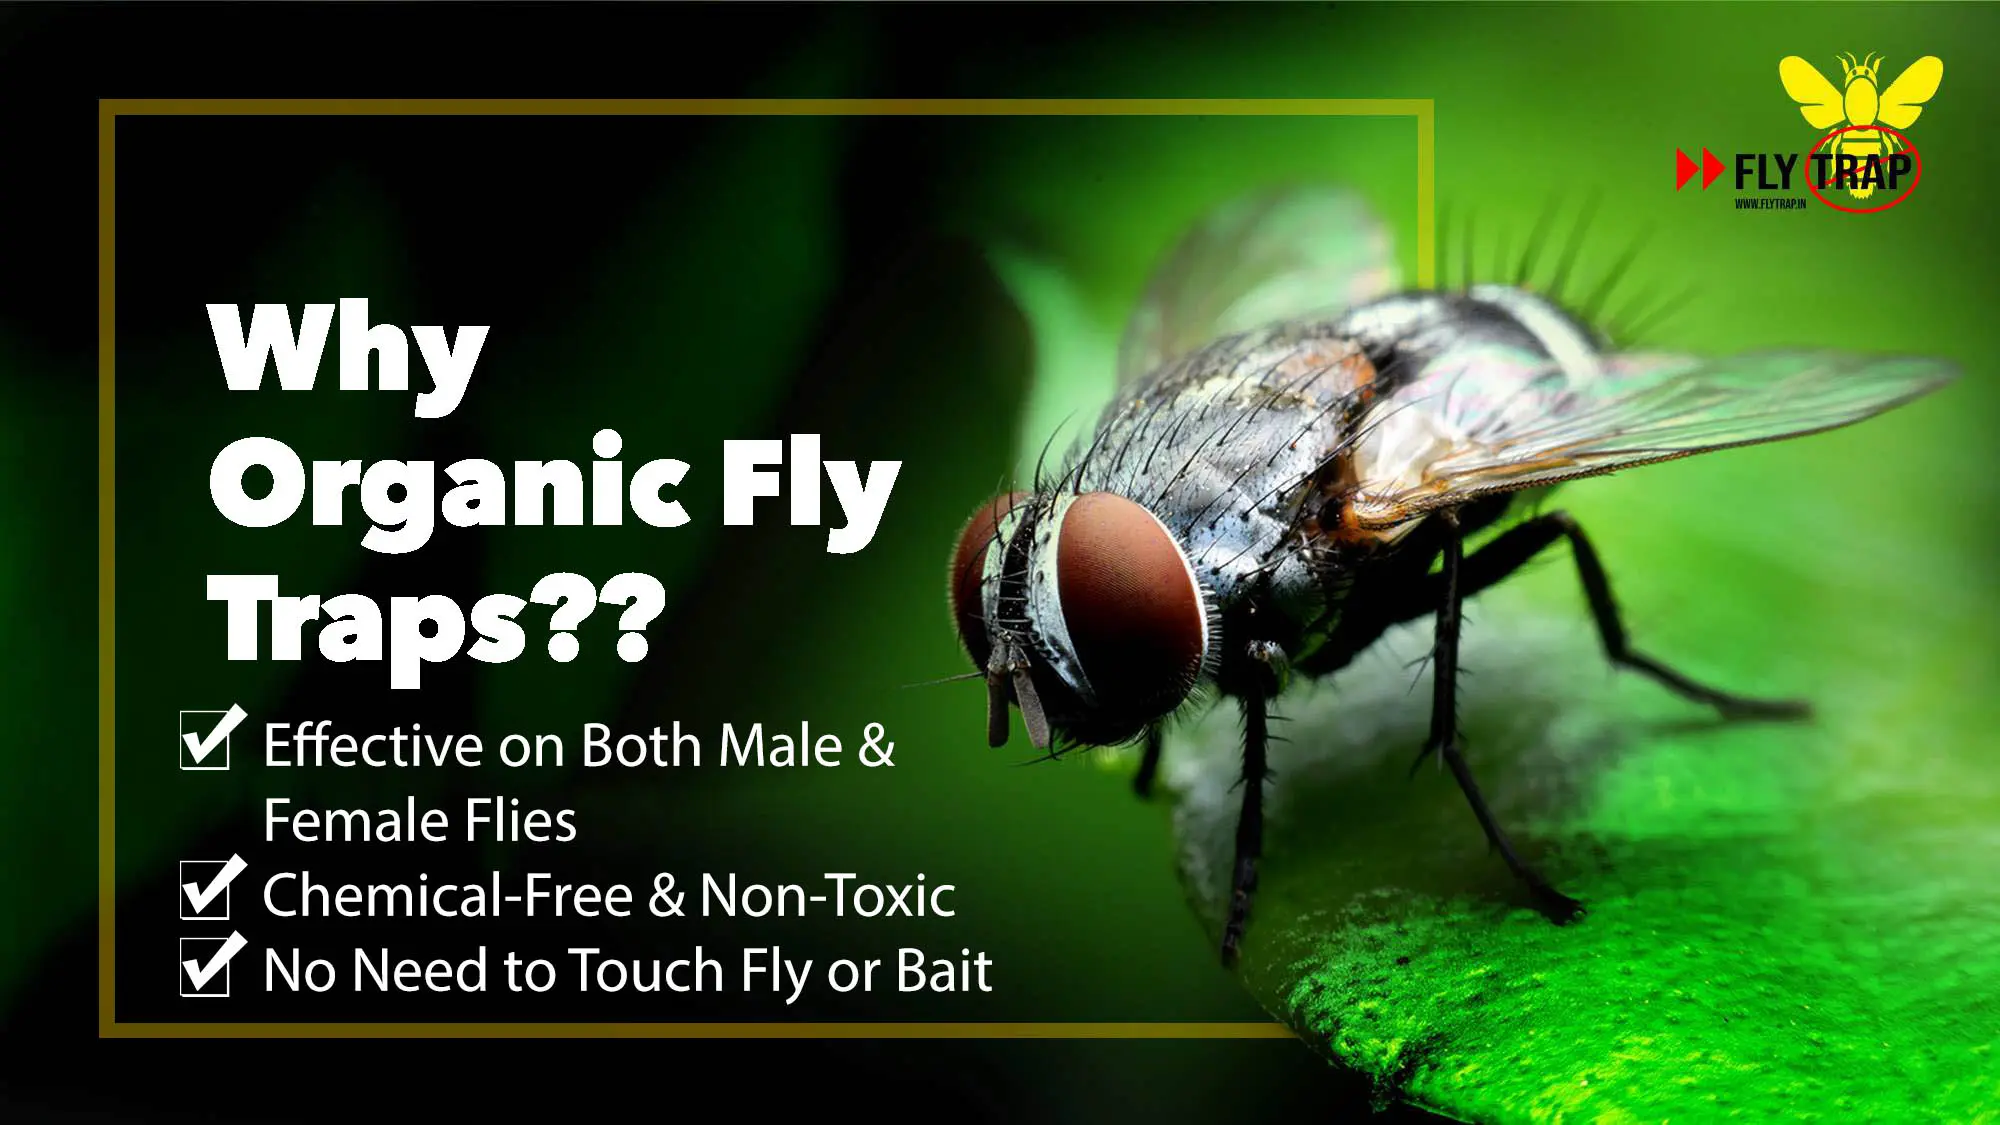 Why Organic Fly Traps? Benefits of Organic Fly Traps by FlyTrap.in